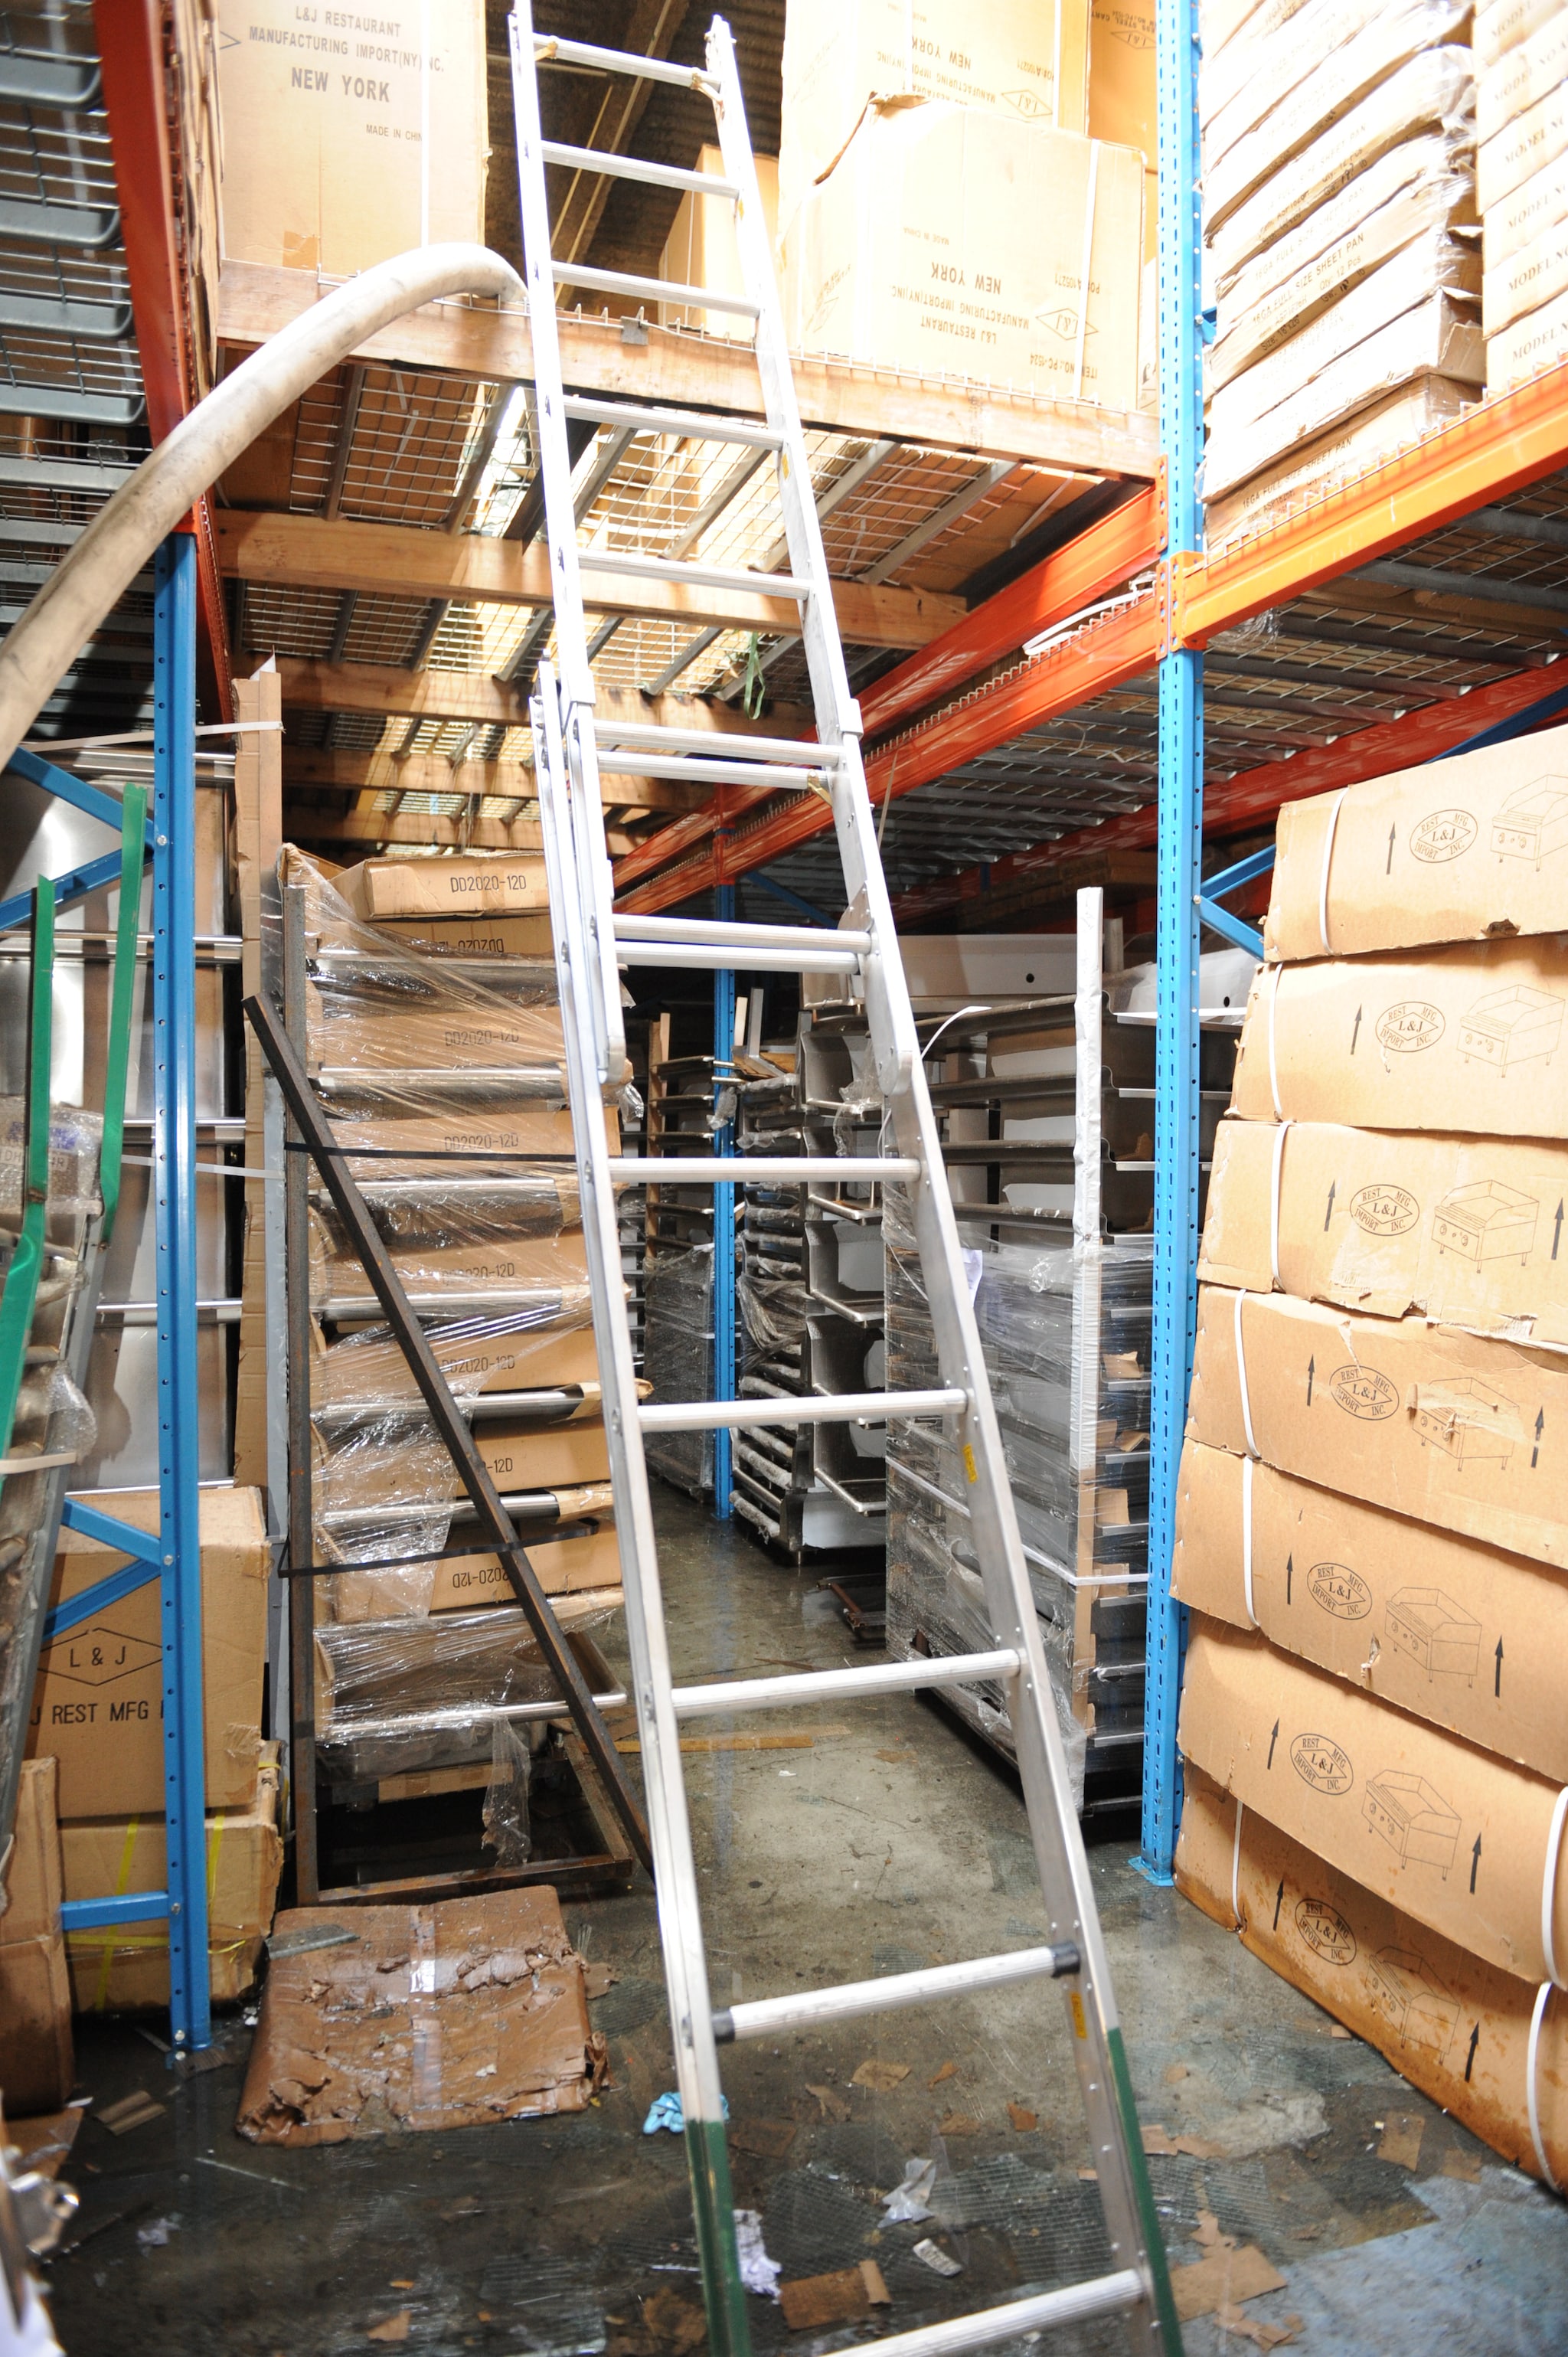 An extension ladder from the floor of the storage area raised to the “catwalk” storage area.  Both storage areas contain large cardboard boxes.